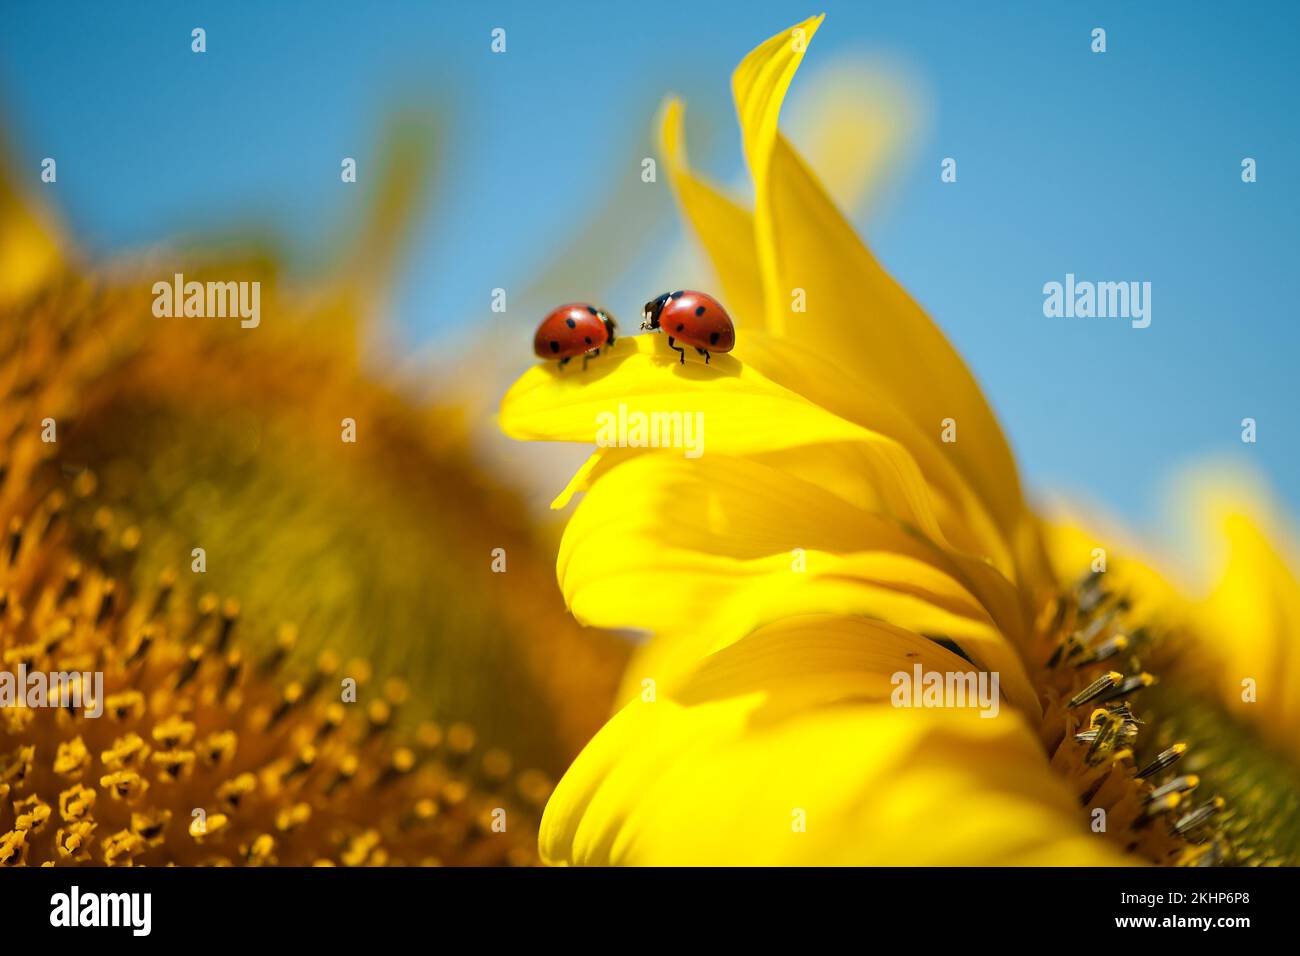 Two ladybugs on a yellow flower. High quality photo Stock Photo